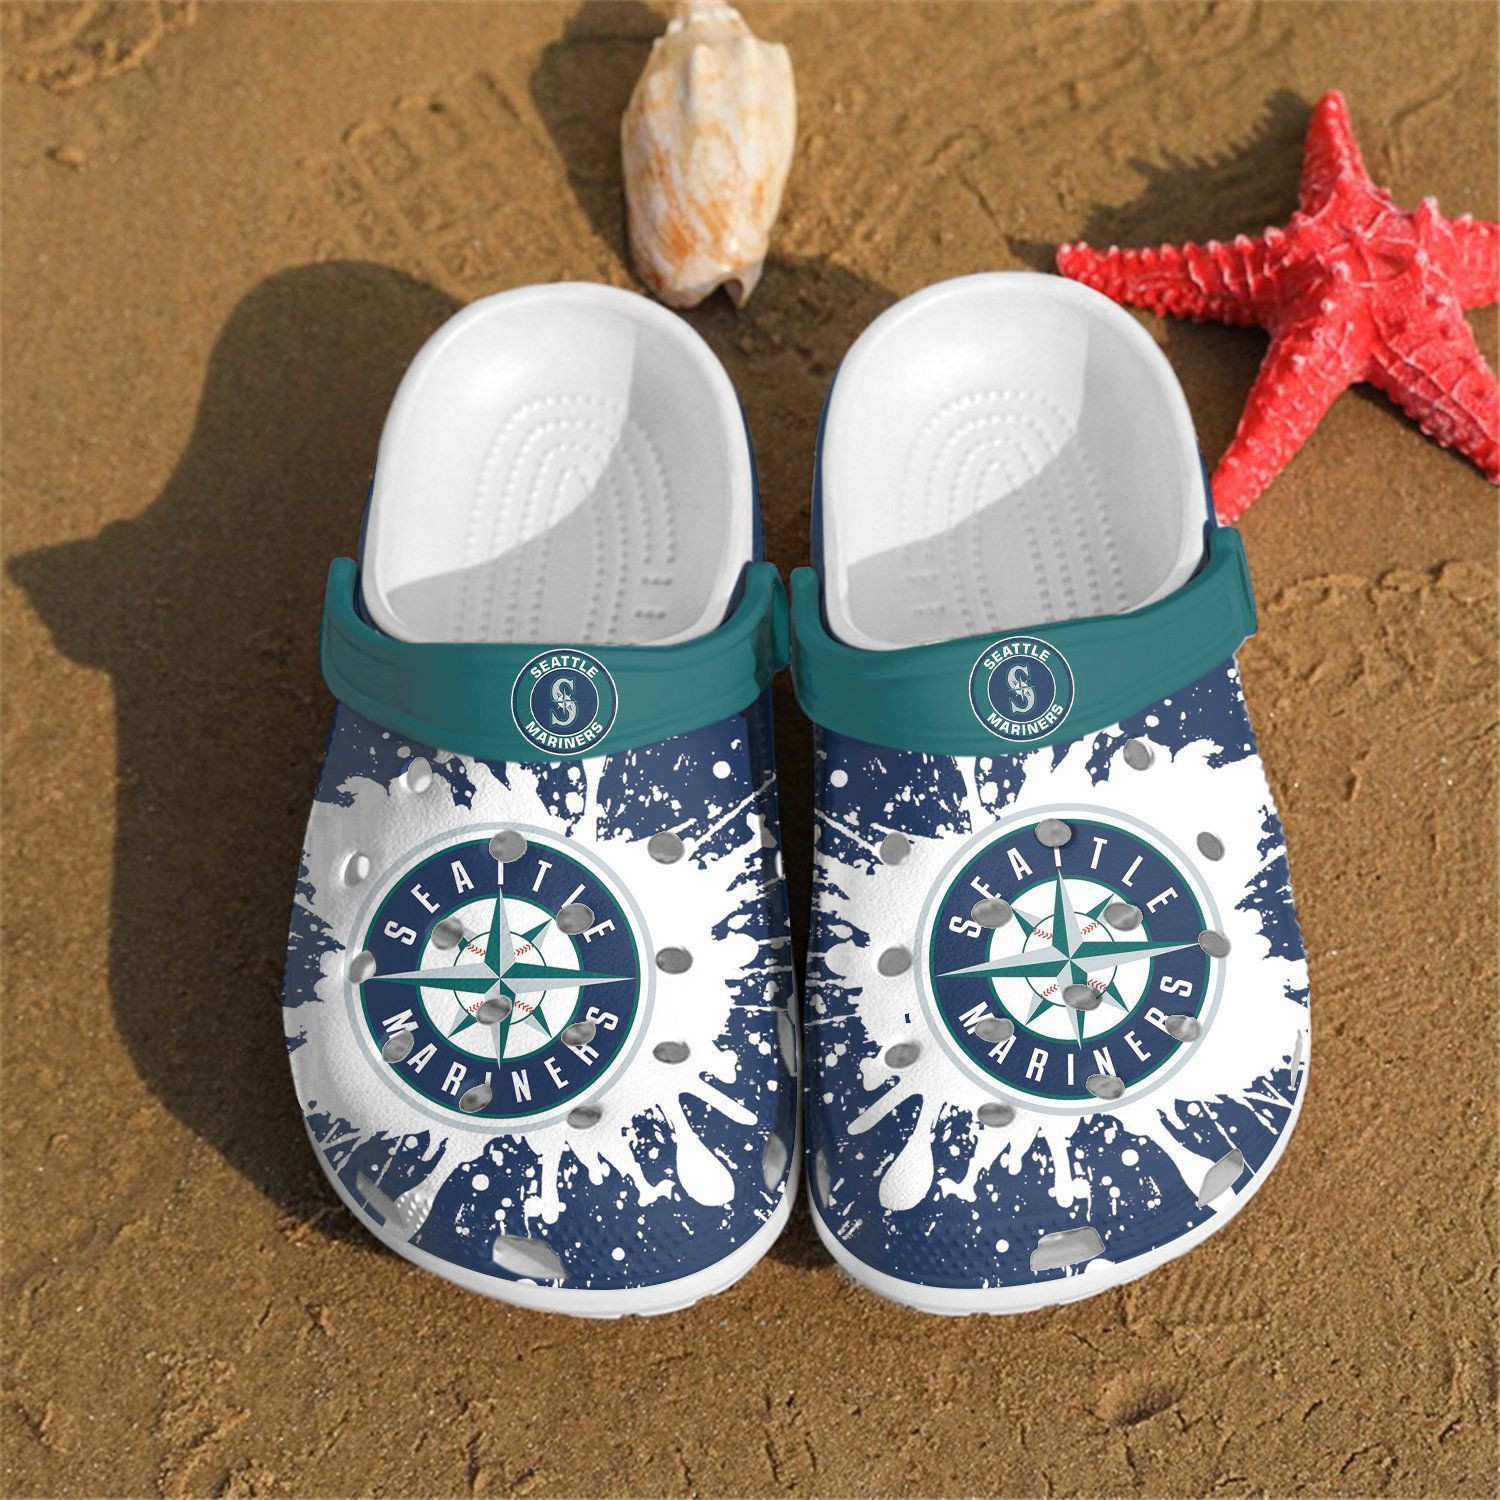 Seattle Mariners Mlb Paint Flakes Gift For Fan Crocs Clog Shoescrocband Clogs